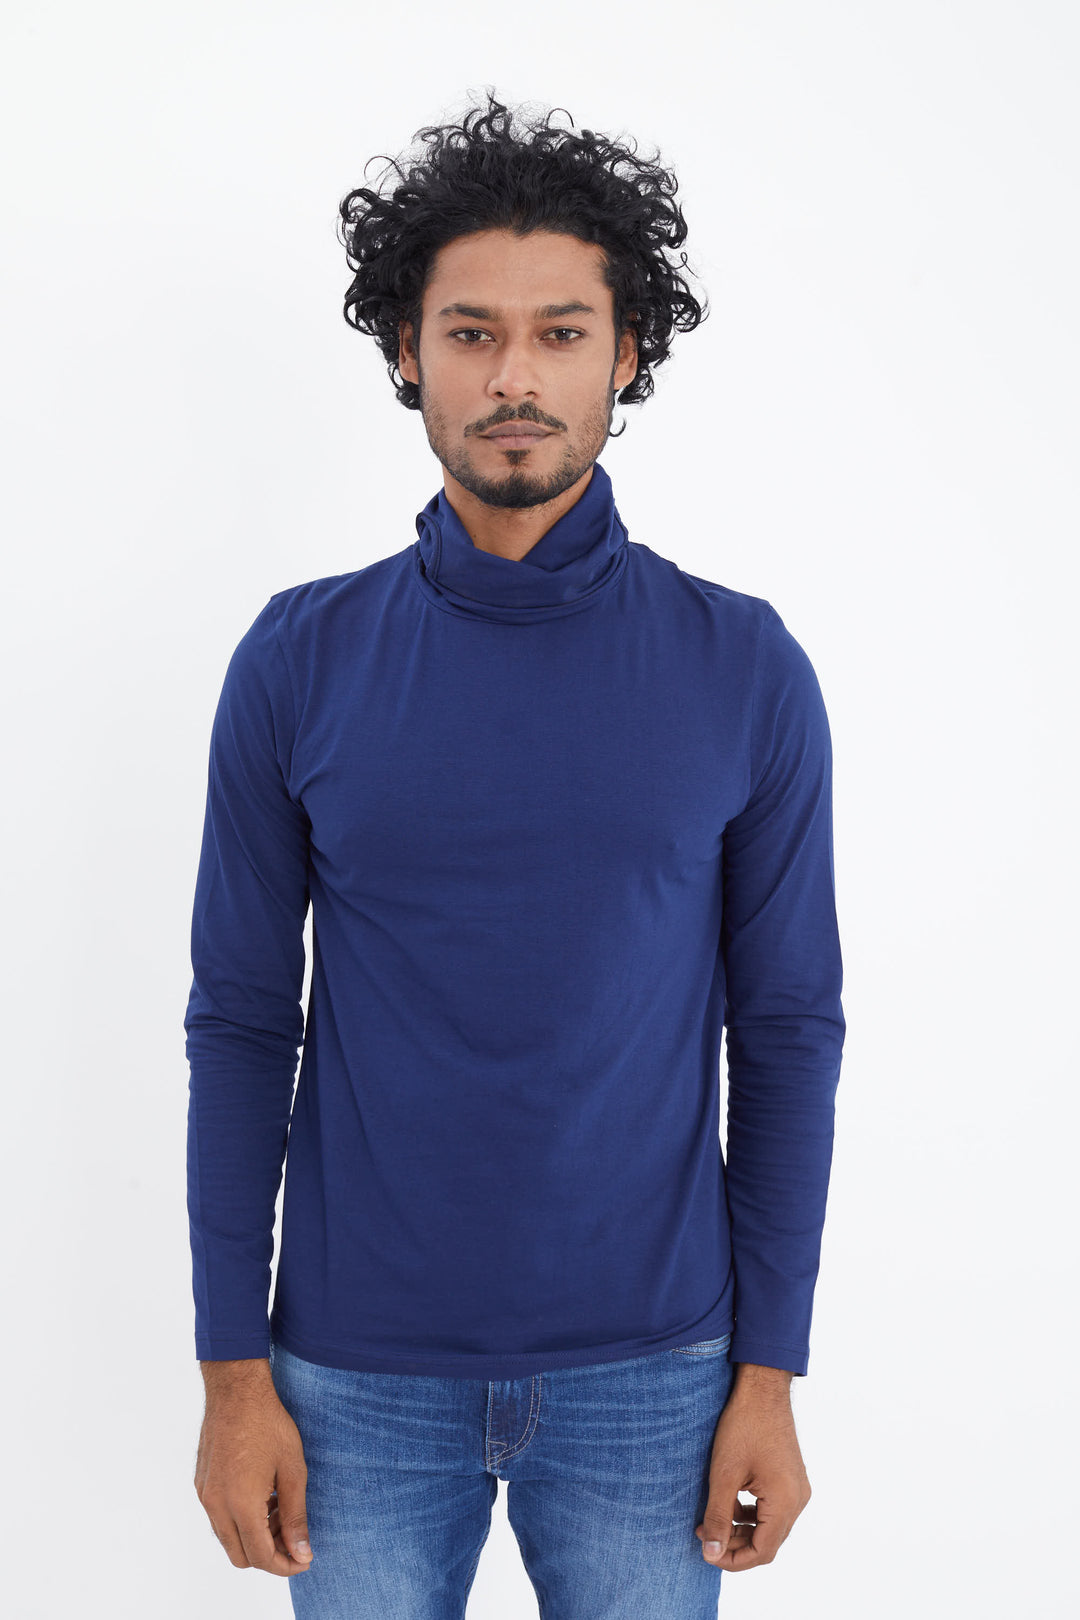 Navy Full Sleeves T-Shirt with Face Cover - SNITCH